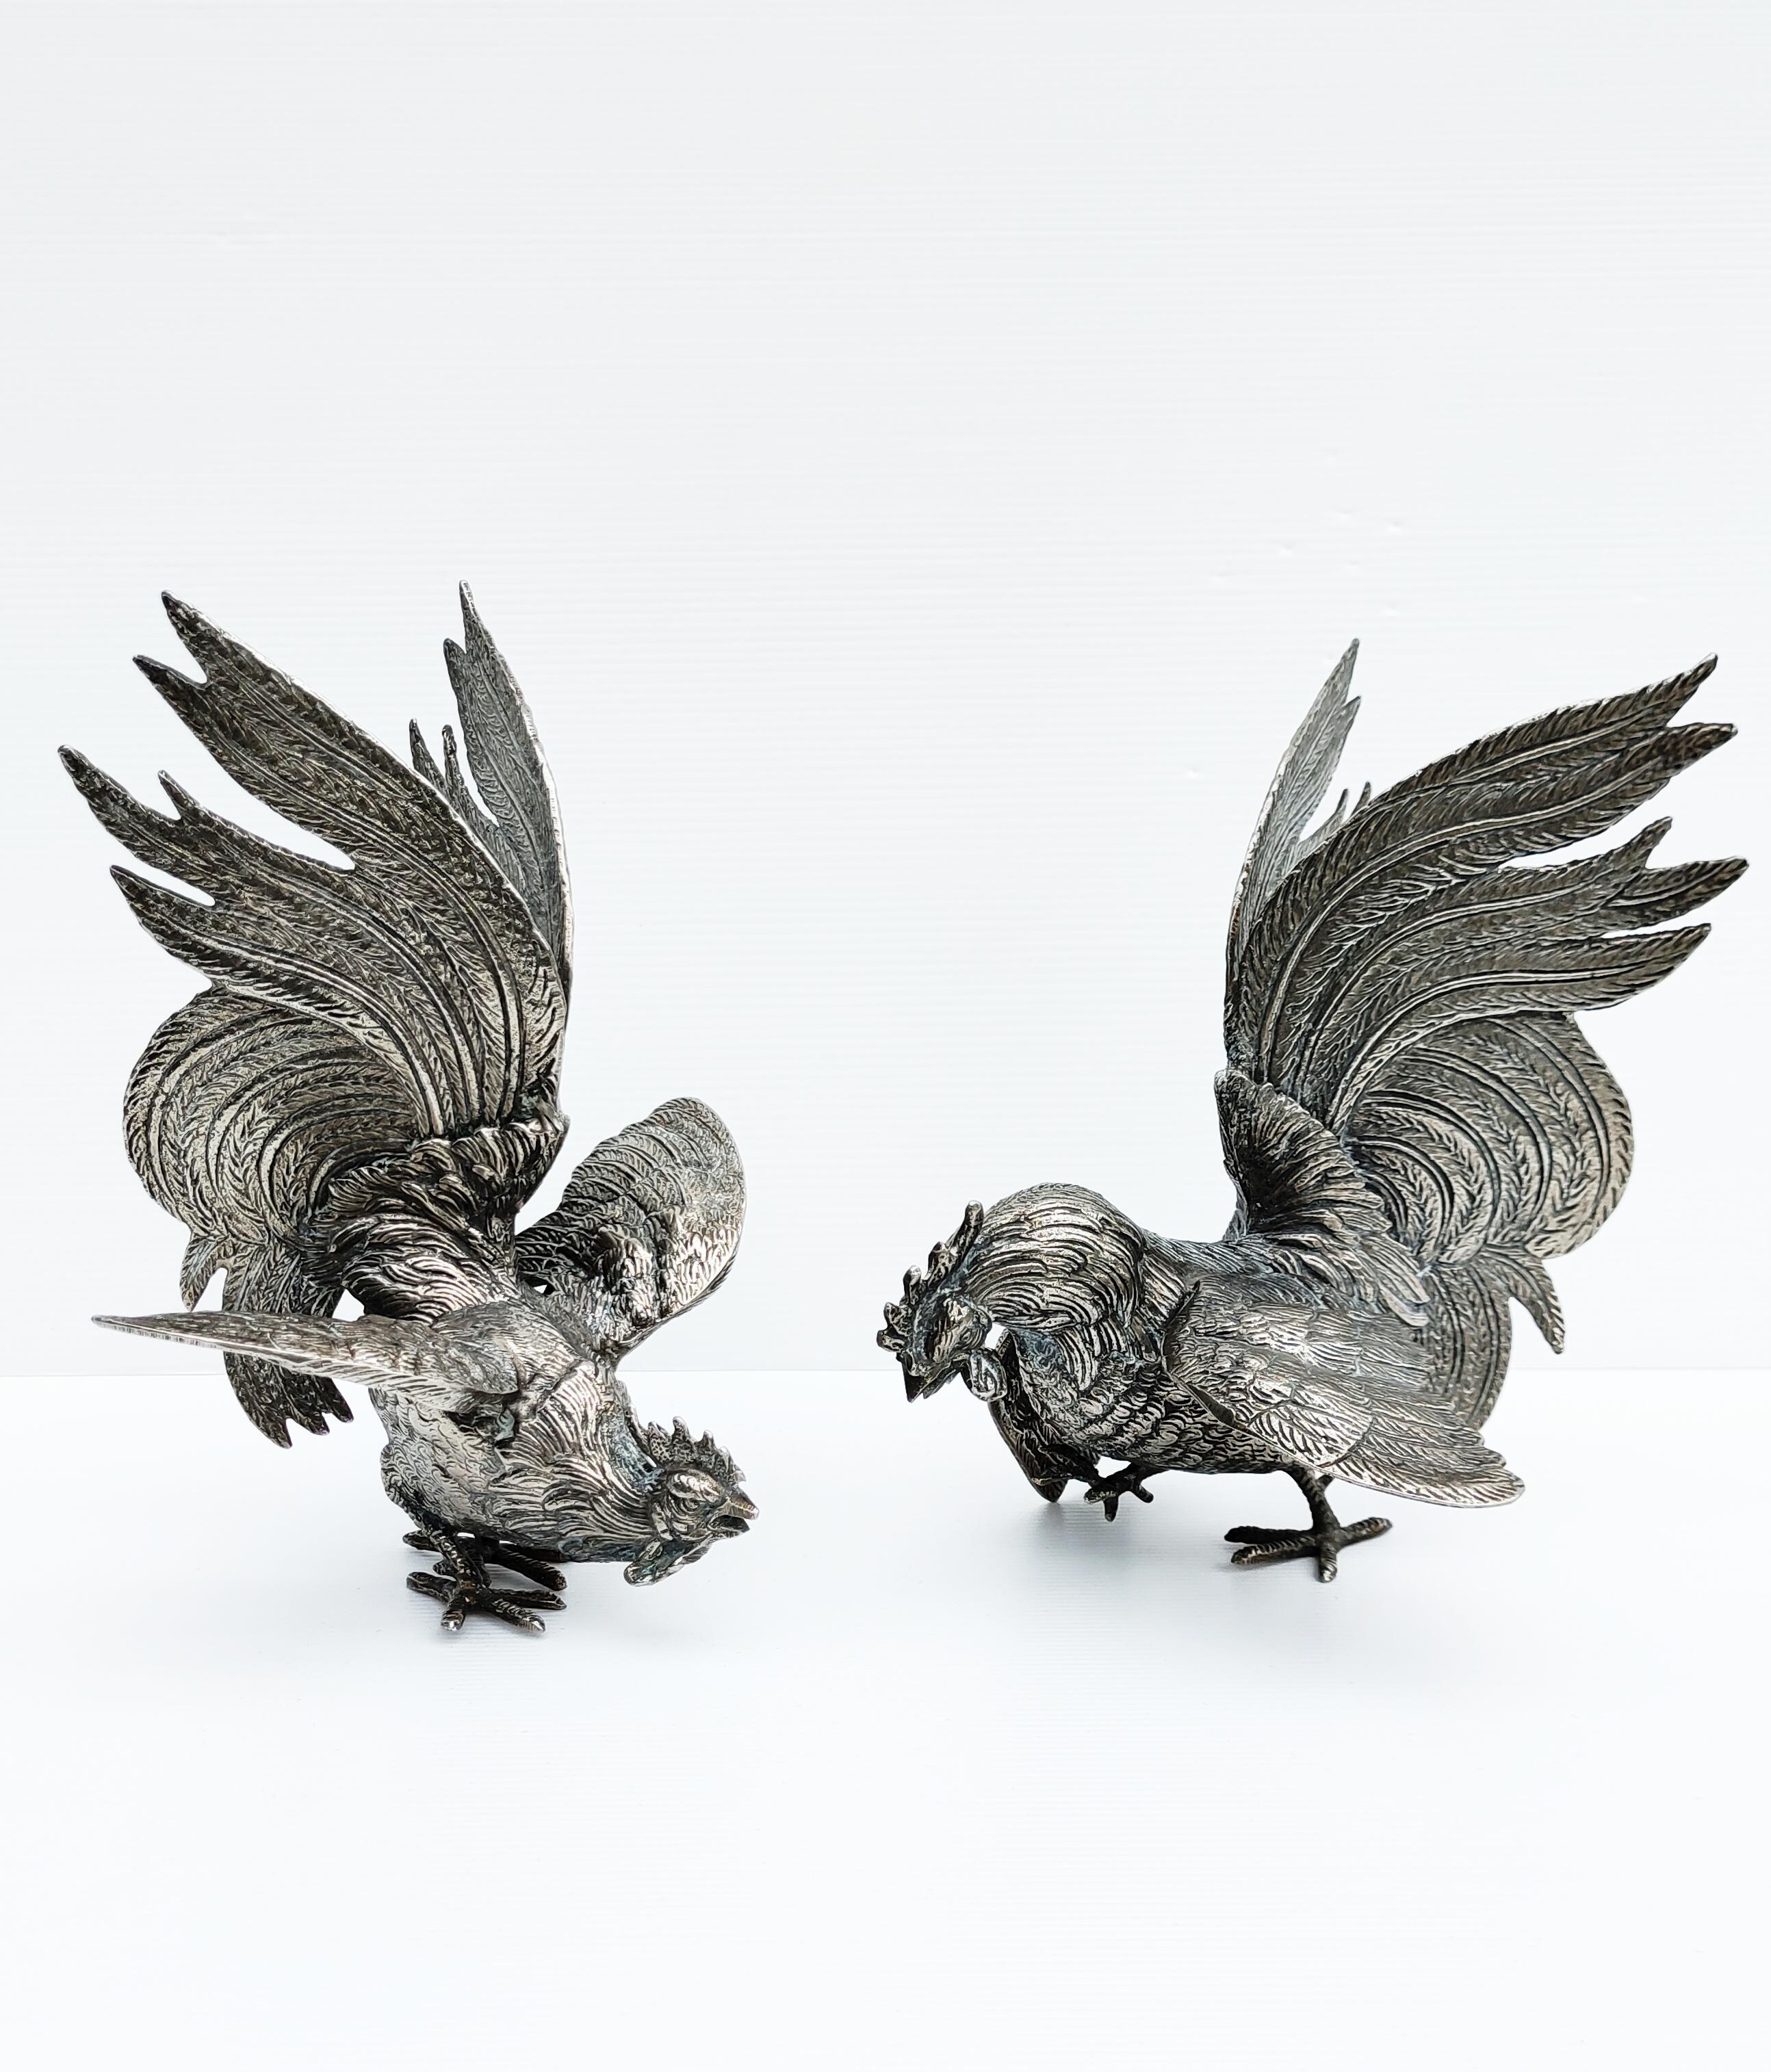 Rare and beautiful silver plate roosters manufactured in France in 1960s.
Roosters in an attitude of fighting. These Fighting Cockerels are created with a wonderful attention to detail with close attention paid to the feathers and plumage. Both